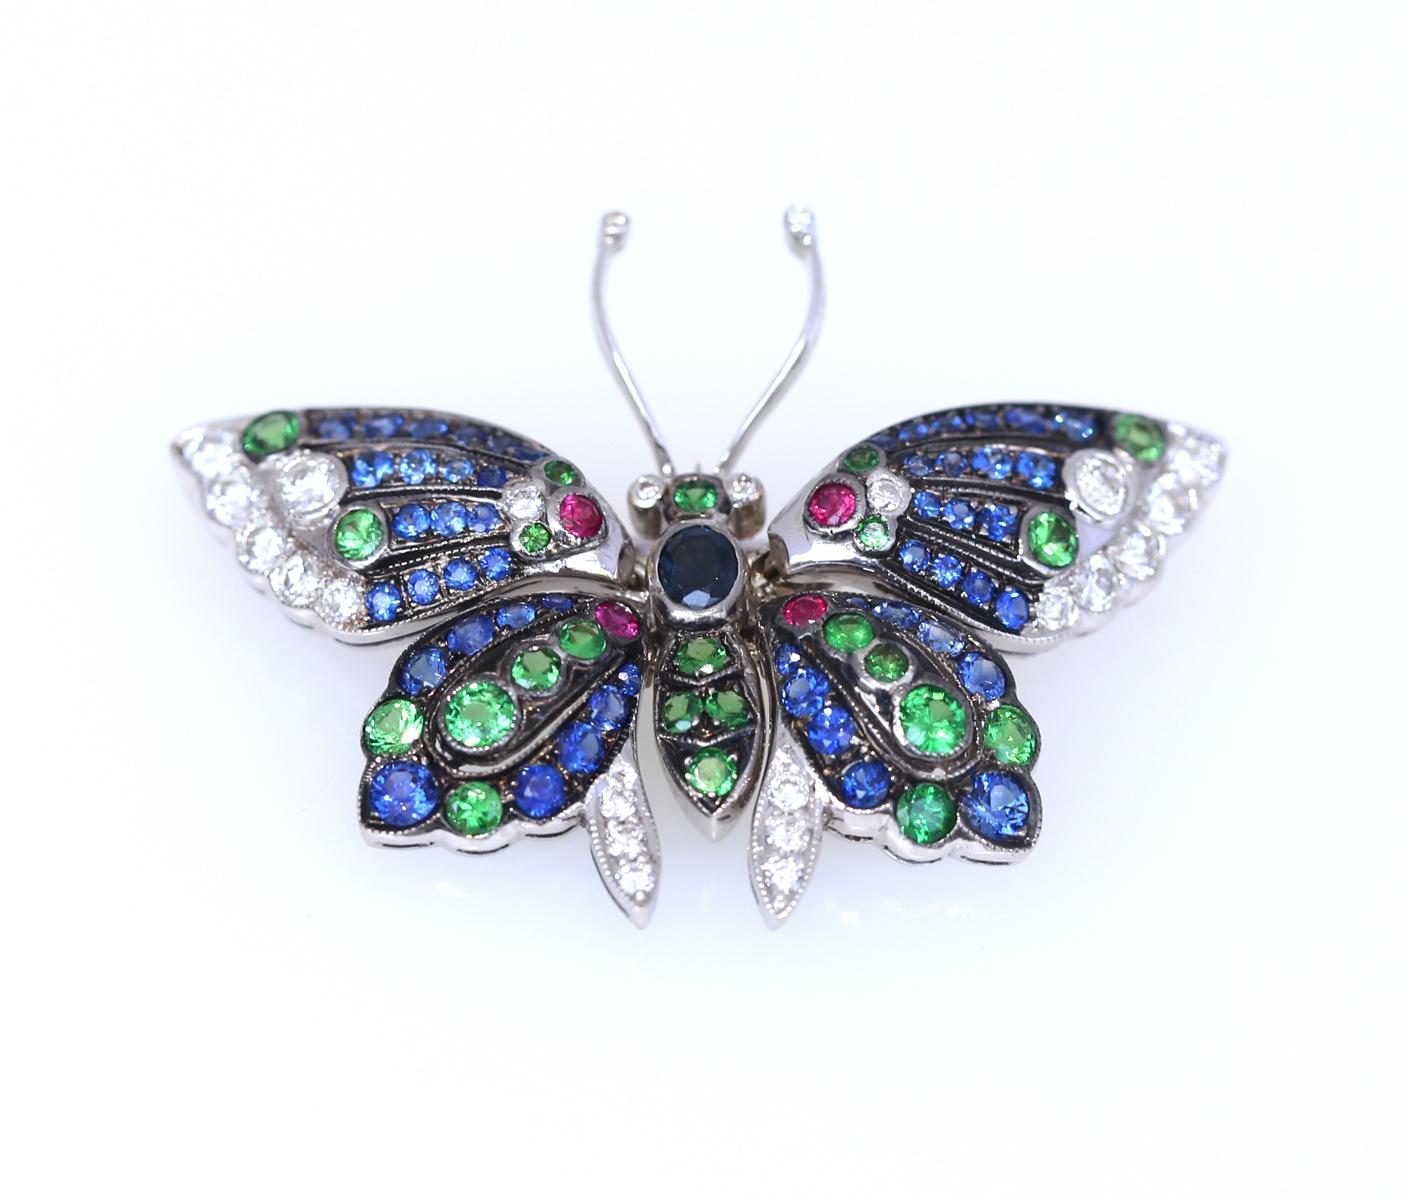 Butterfly Pendant and also a Brooch with fine Sapphires, Emeralds, Rubies and Diamonds.
The fine design and amazing execution of the jeweler not only mimicking the great natural forms and colours but also mimics the movement of the wings. Most of